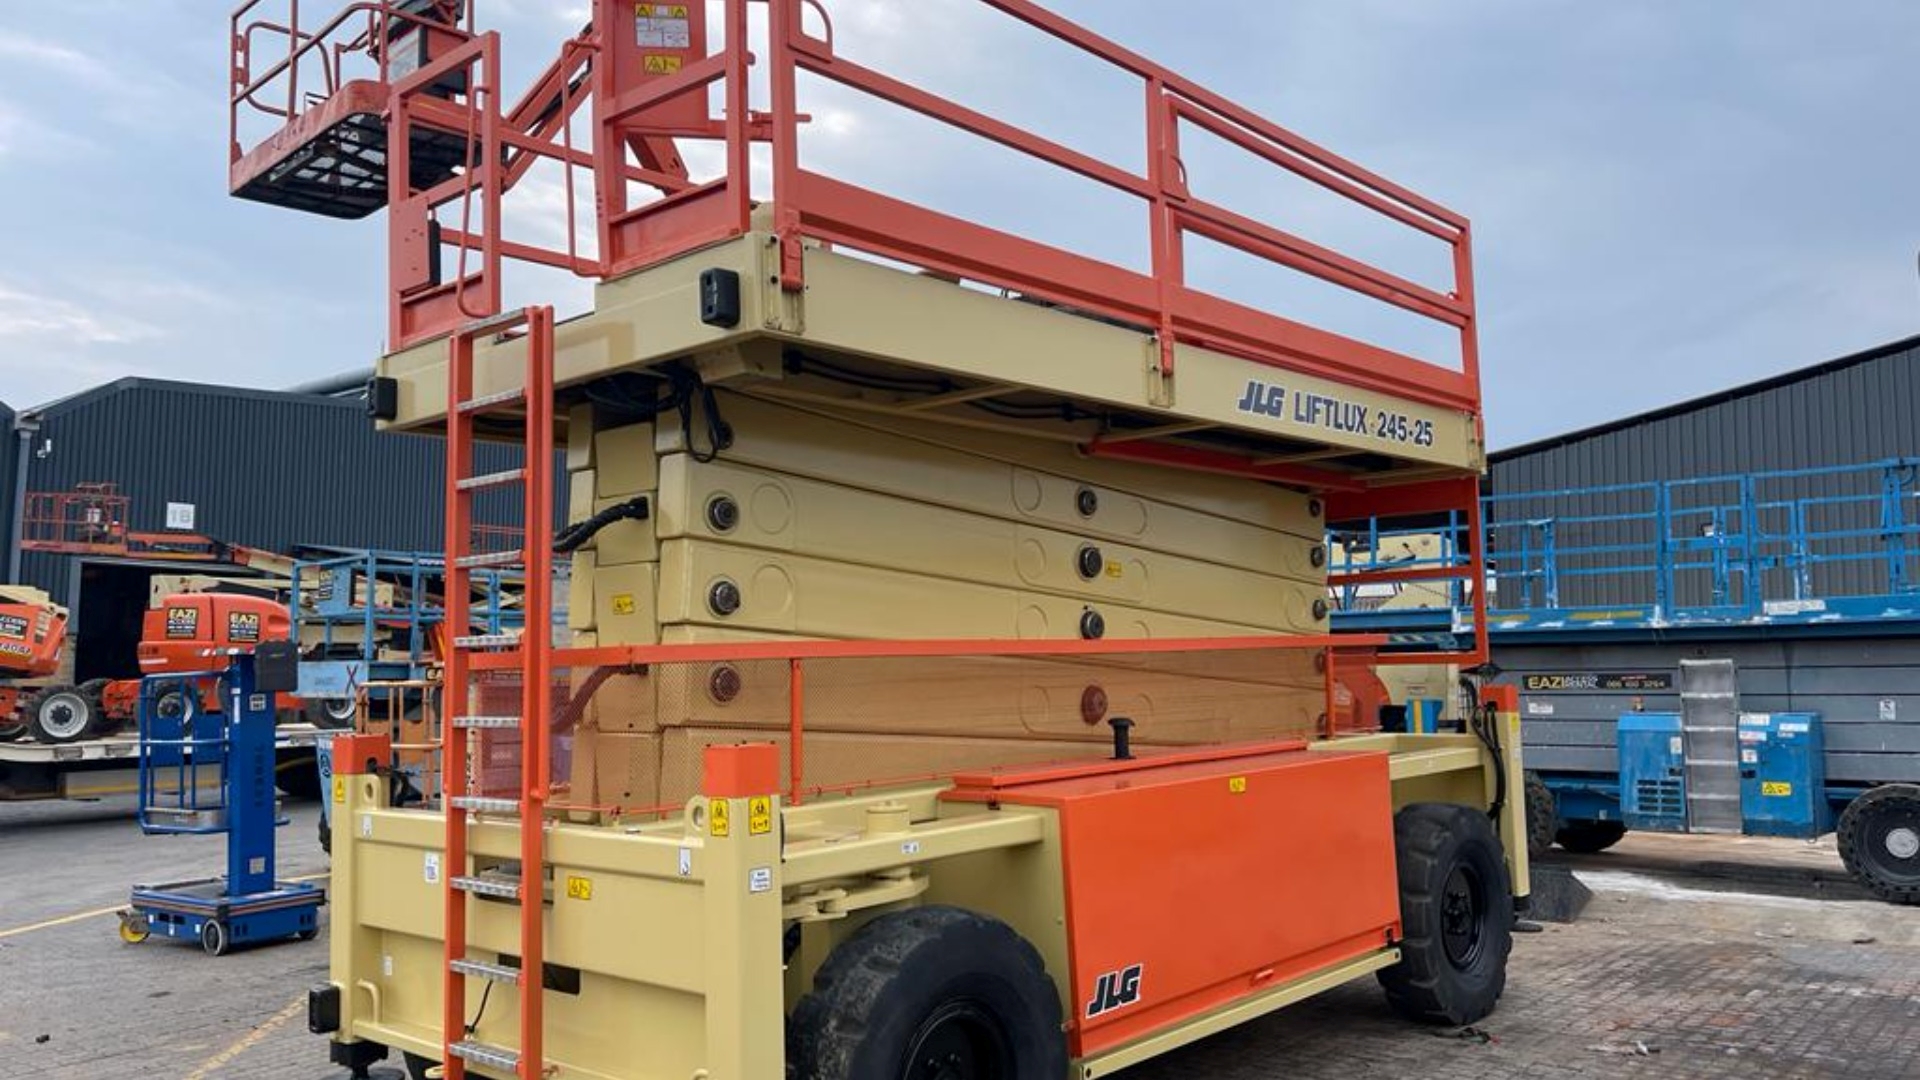 Used 2008 2008 JLG 245 25 Lift Lux 25m Working Height Diesel for sale in  Gauteng | R 799,995